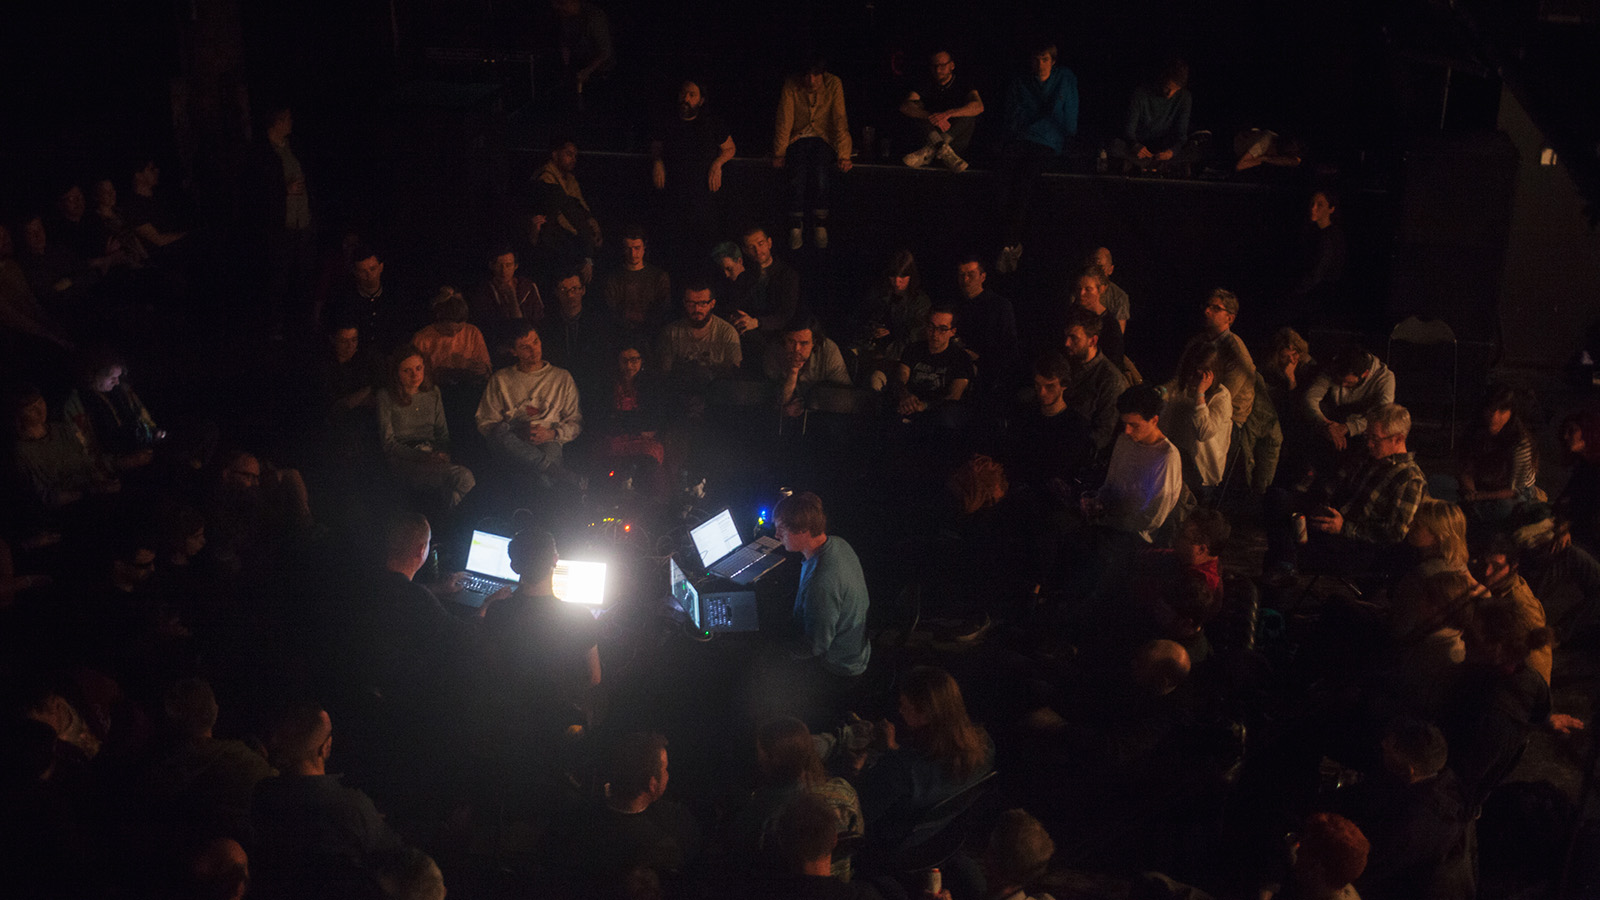 A crowd of people gather around a set of four laptops during a set at Counterflows music festival. The light from the devices illuminates the people around them.